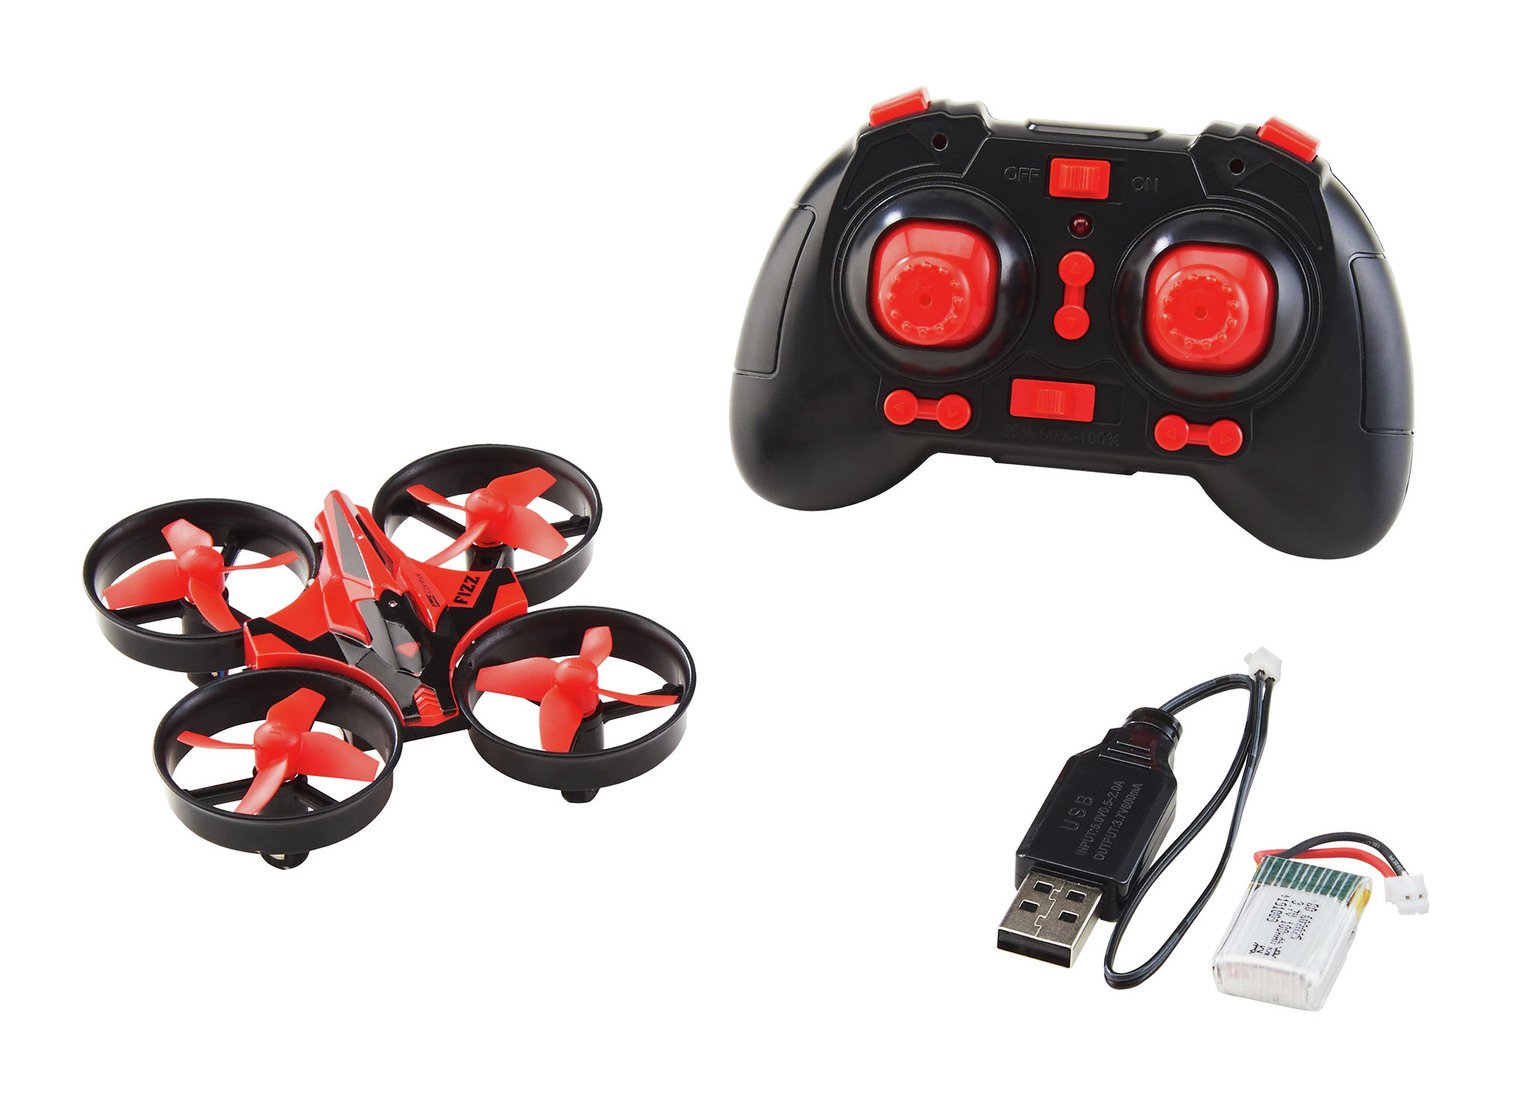 Revell Fizz 3 Speed Mini Drone Review